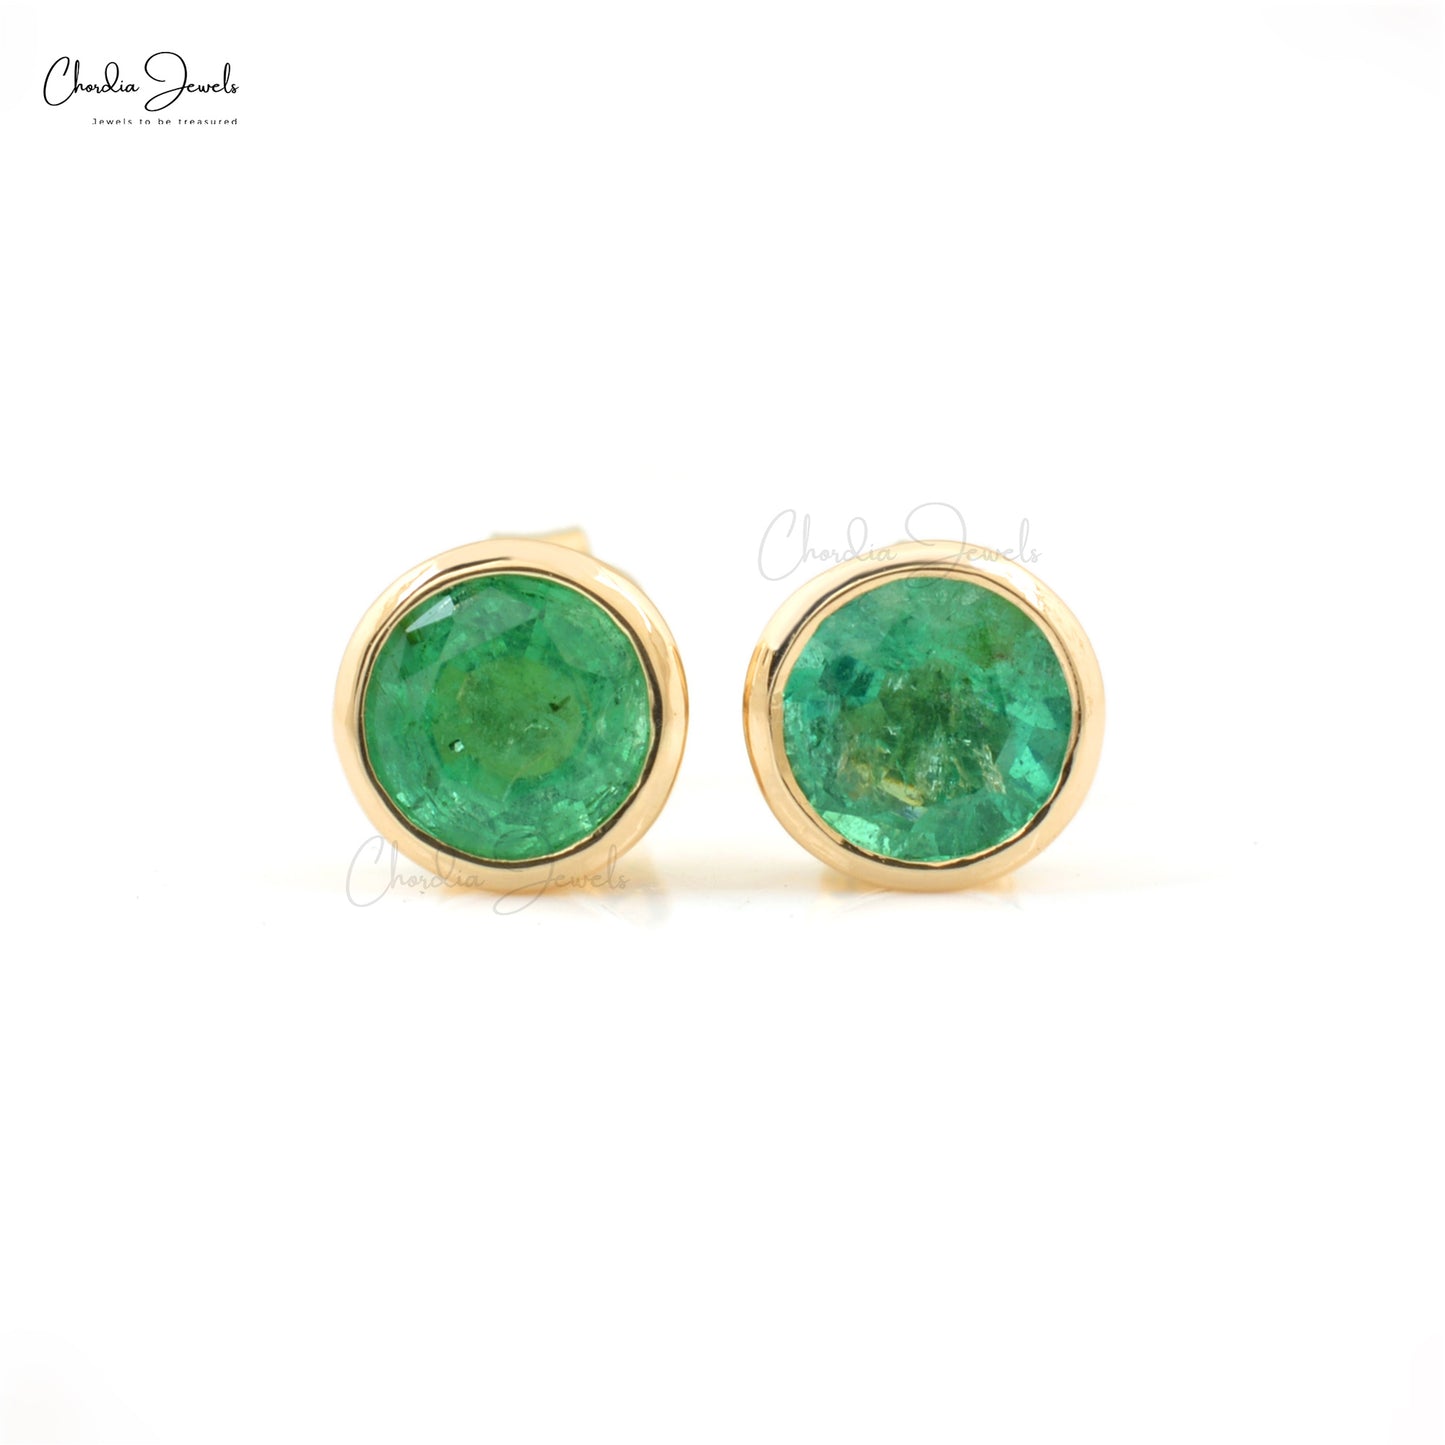 Natural Emerald 0.94Ct Oval cut Gemstone Solitaire Earrings 14k Real Yellow Gold Bezel Set Hallmarked Studs For Her Light Weight Jewelry